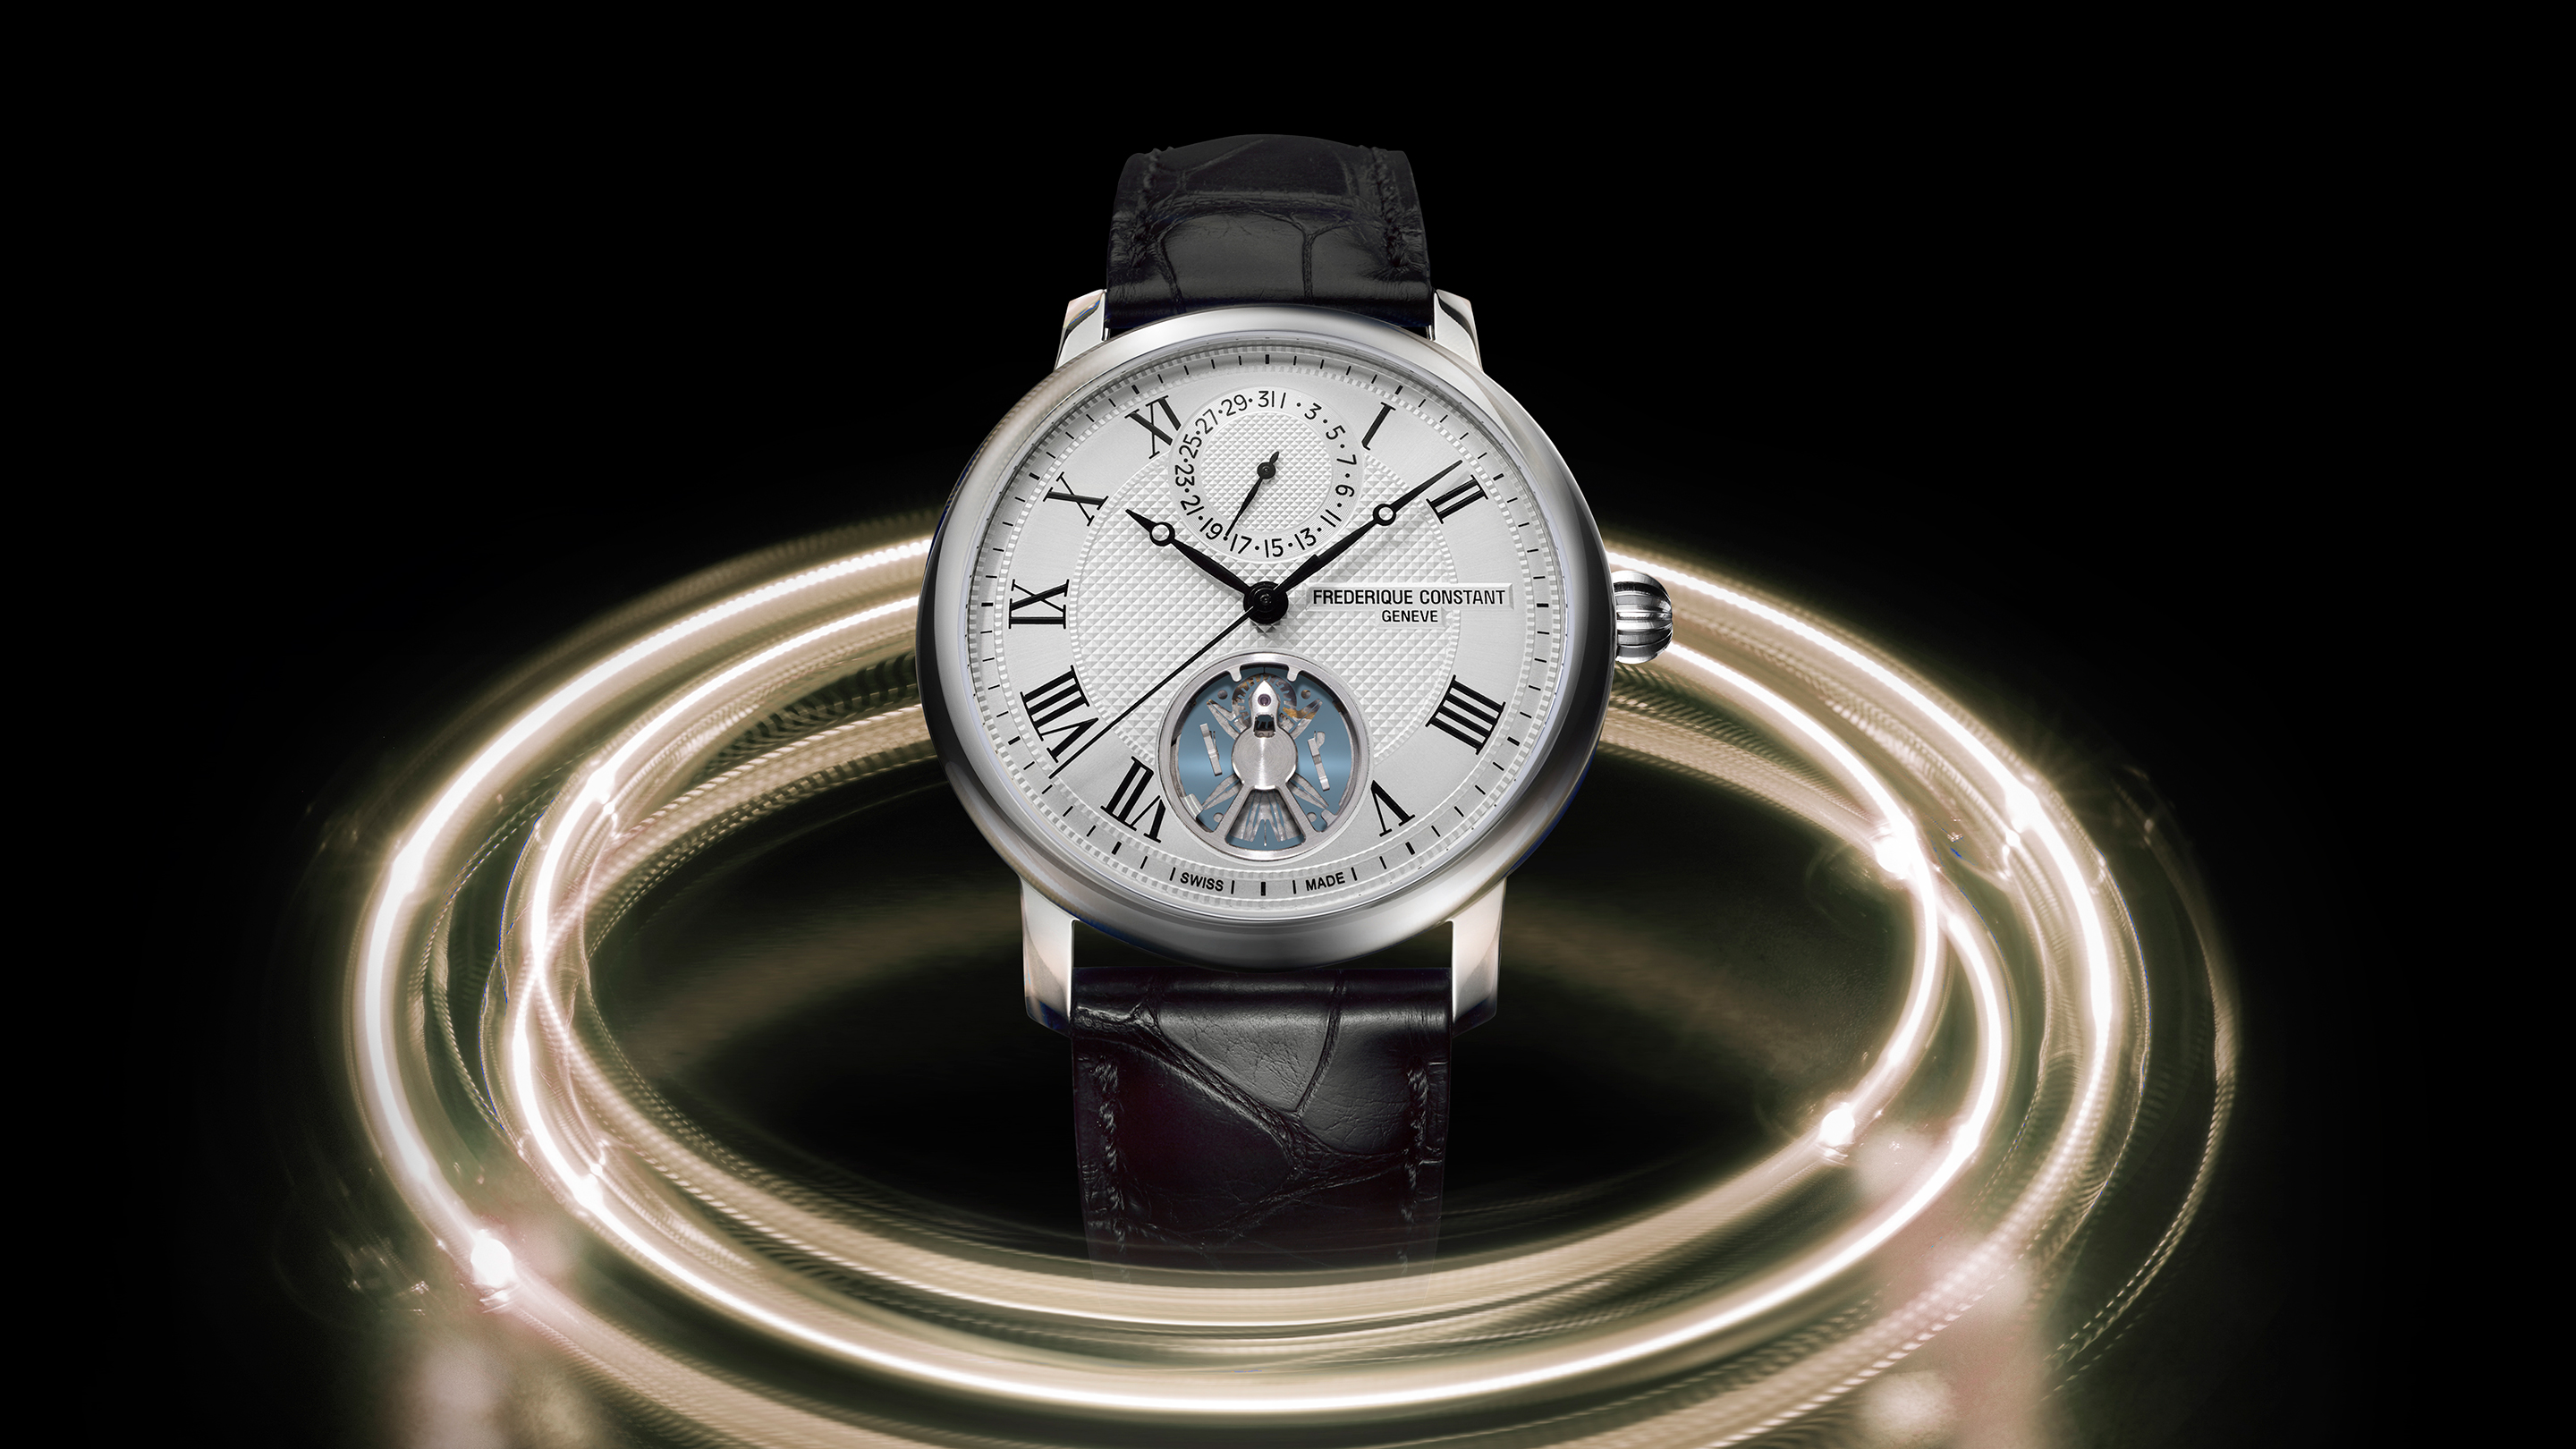 In-Depth: The Silicon-Powered Speed Of The Frederique Constant